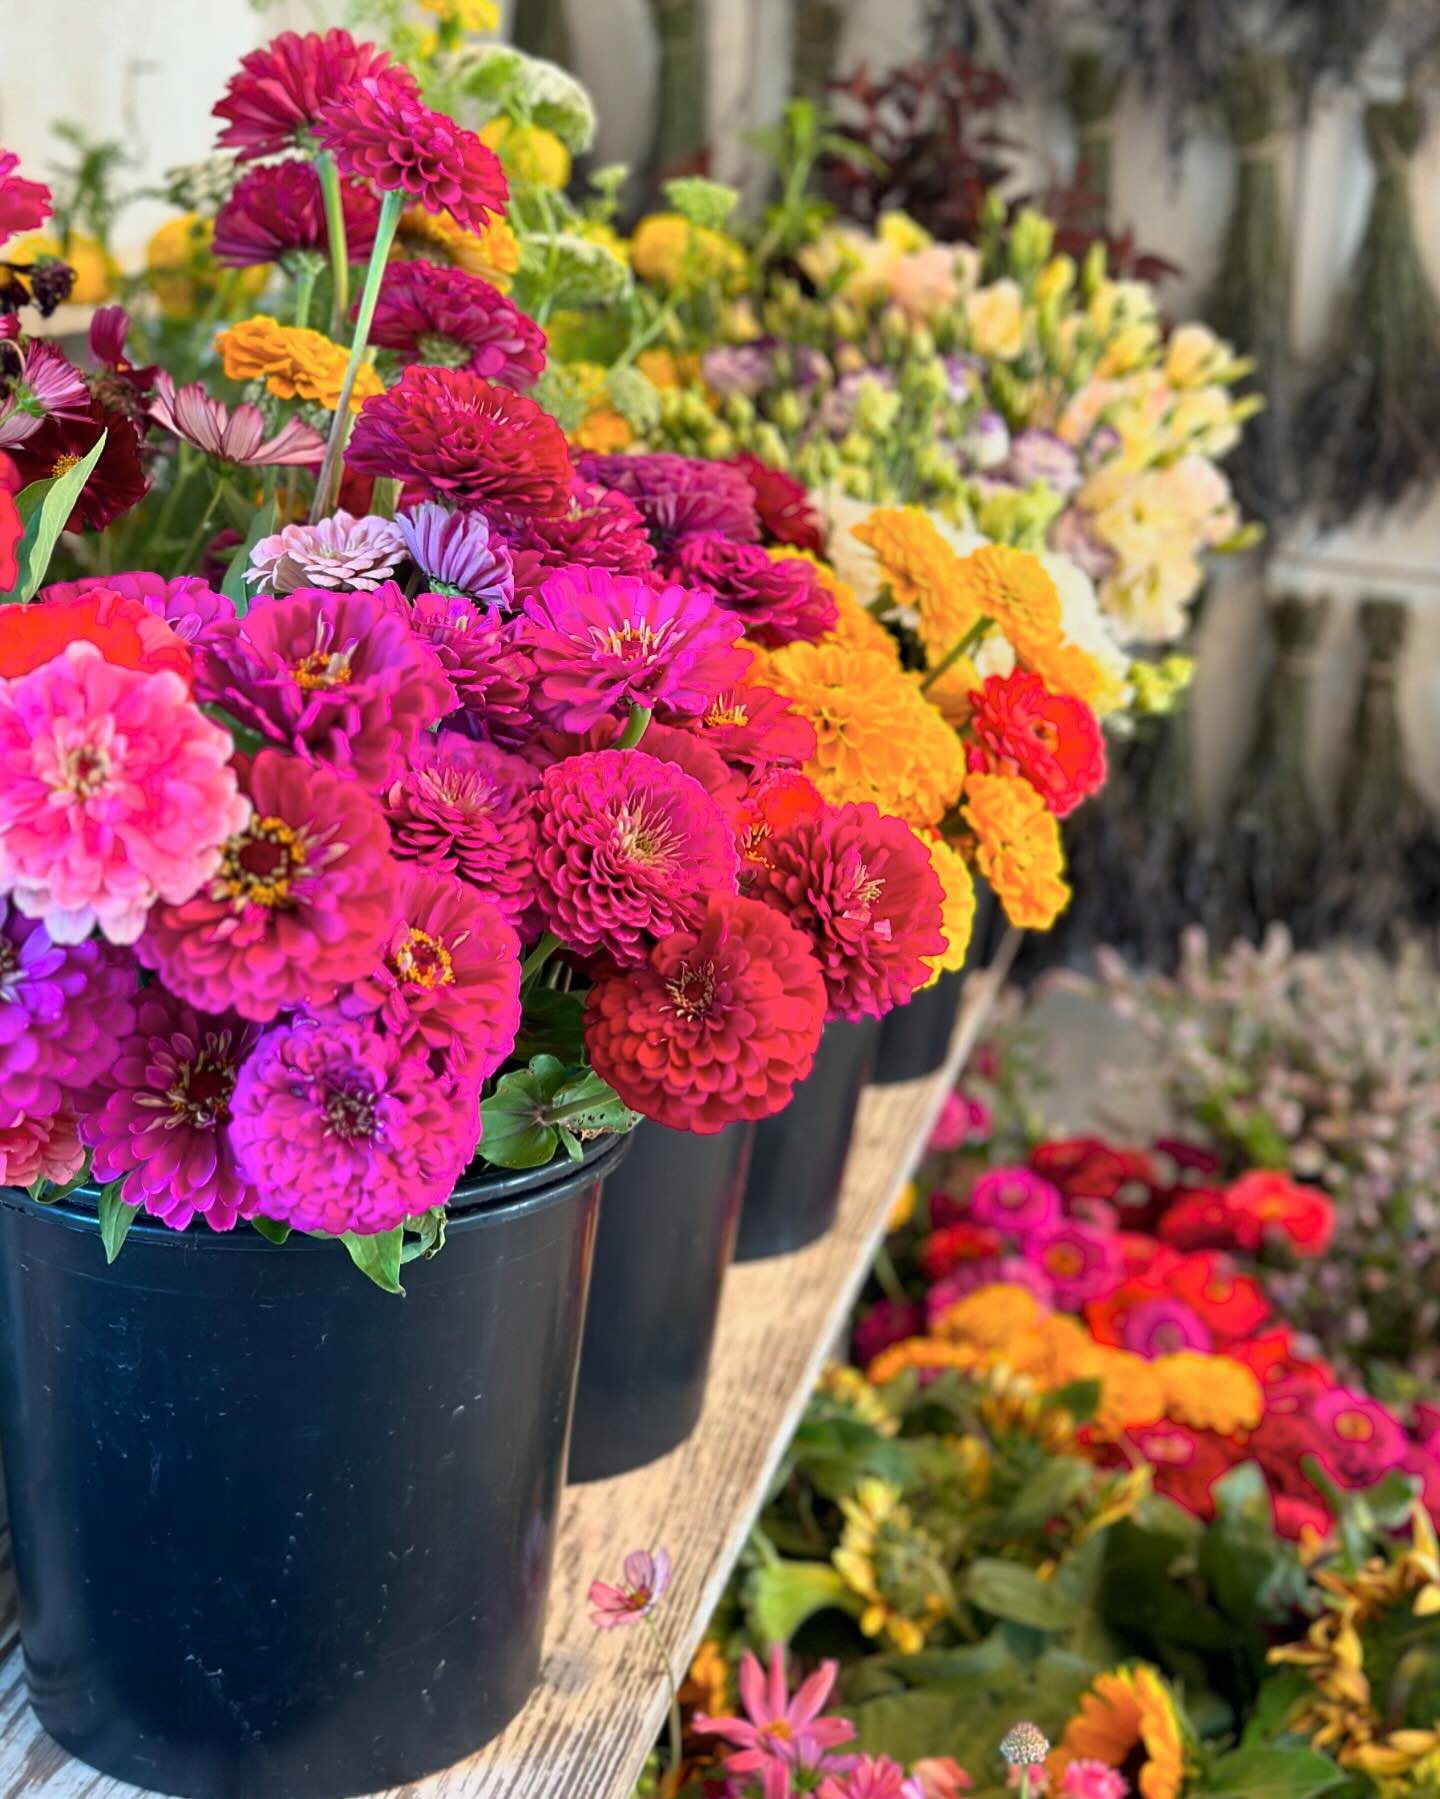 Are you looking for a little something special for Mother&rsquo;s Day? Grab a spot for mom to our Bloom Bar experience 💐We provide all of the flowers, vase, and a pair of snips to borrow for mom to create a beautiful bouquet of flowers.

New this ye